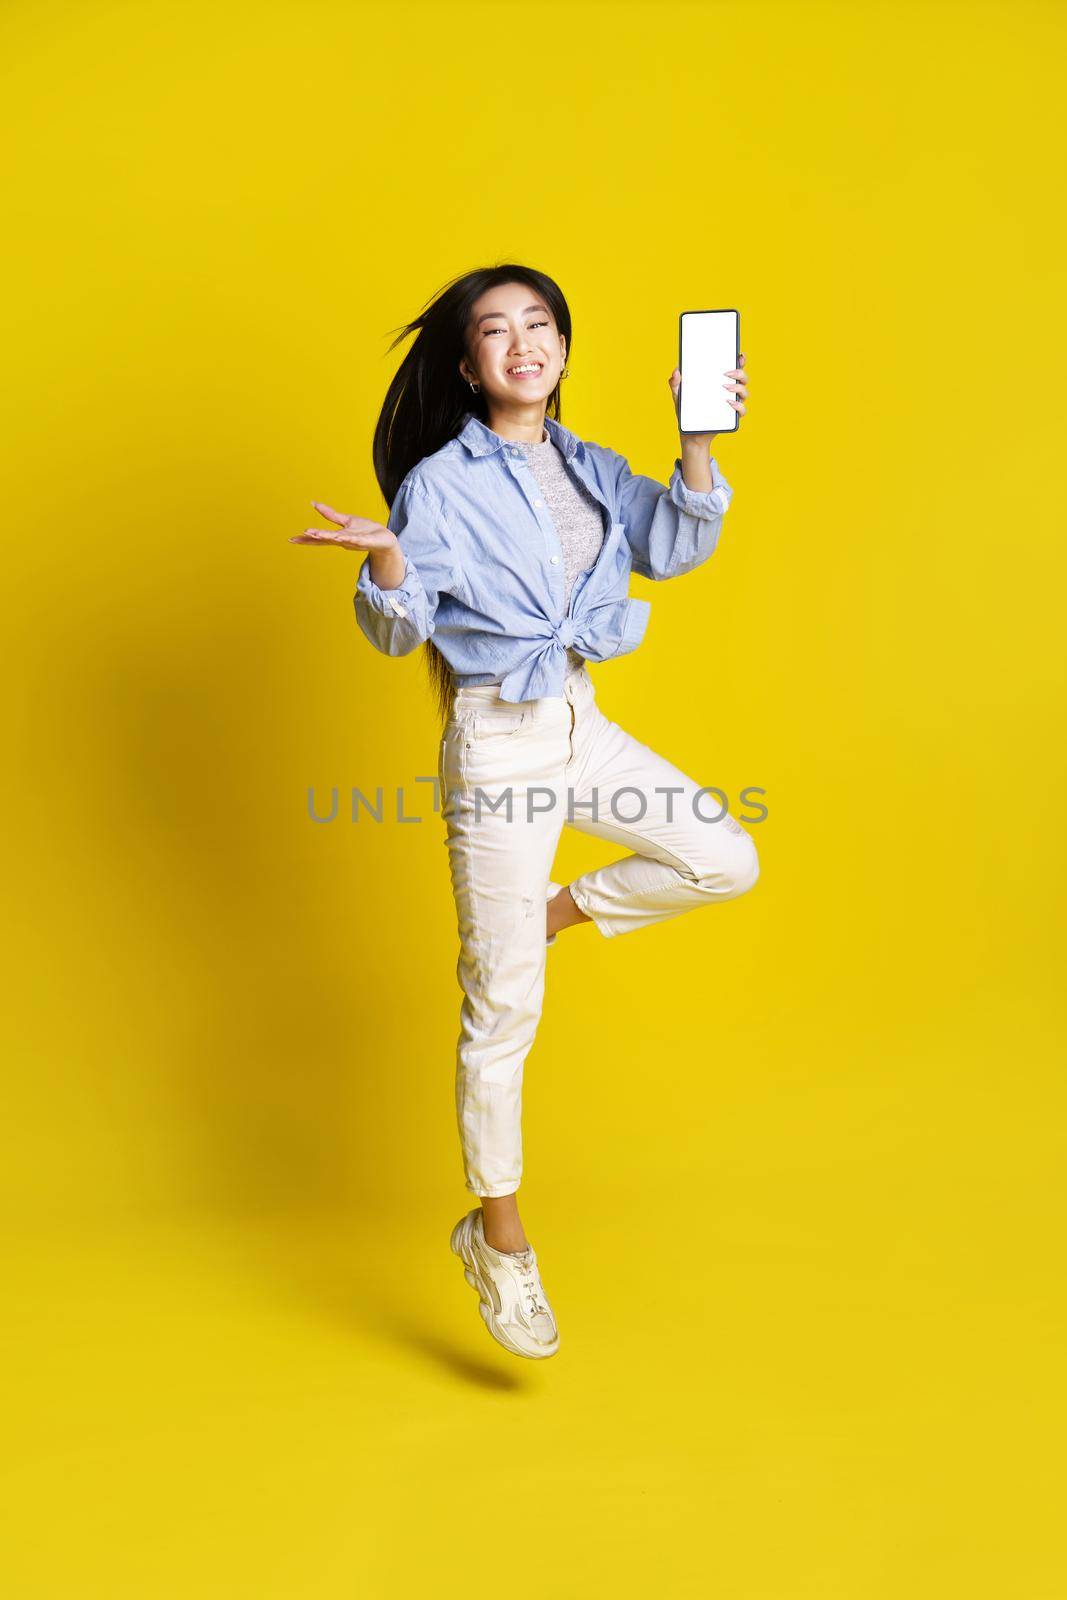 Happy asian girl jumping holding smartphone showing white screen mobile app advertisement isolated on yellow background. Full length portrait of joyful asian girl. Product placement by LipikStockMedia